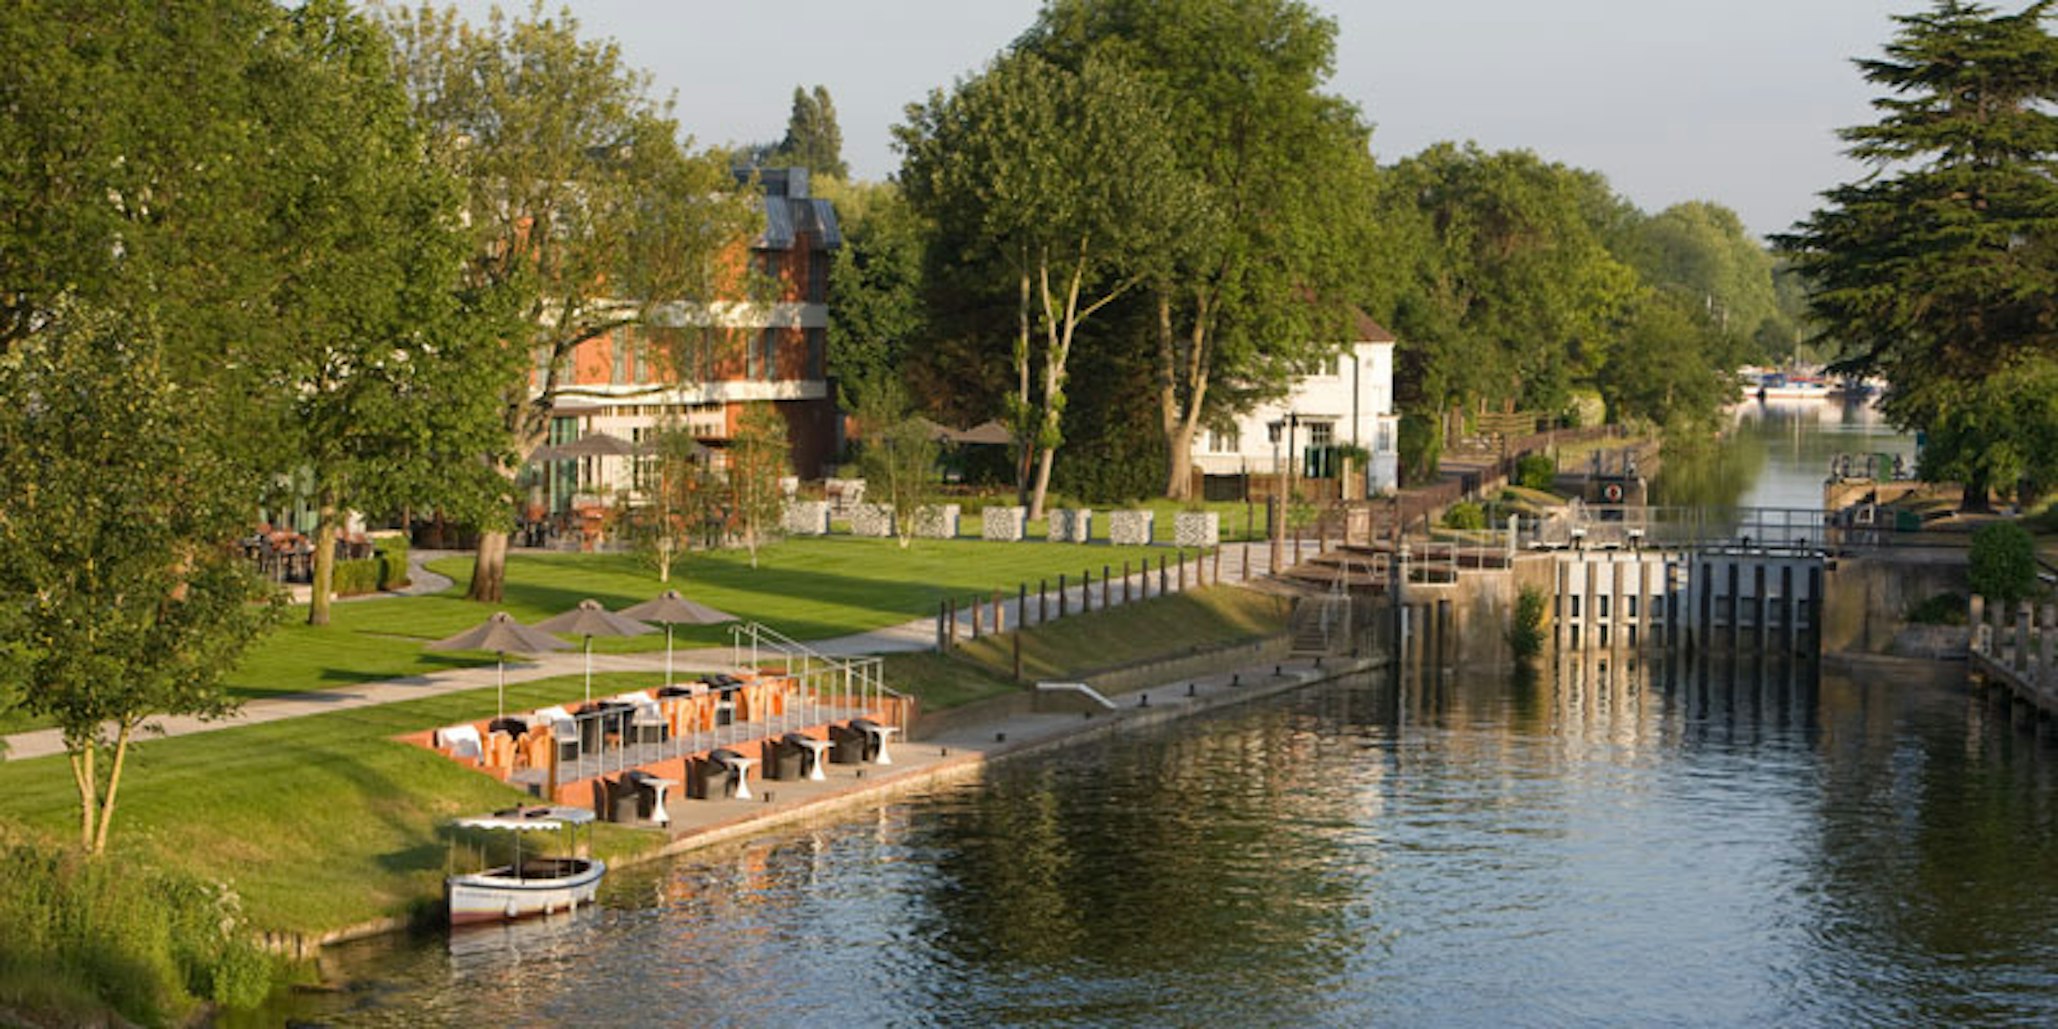 The Runnymede-on-Thames